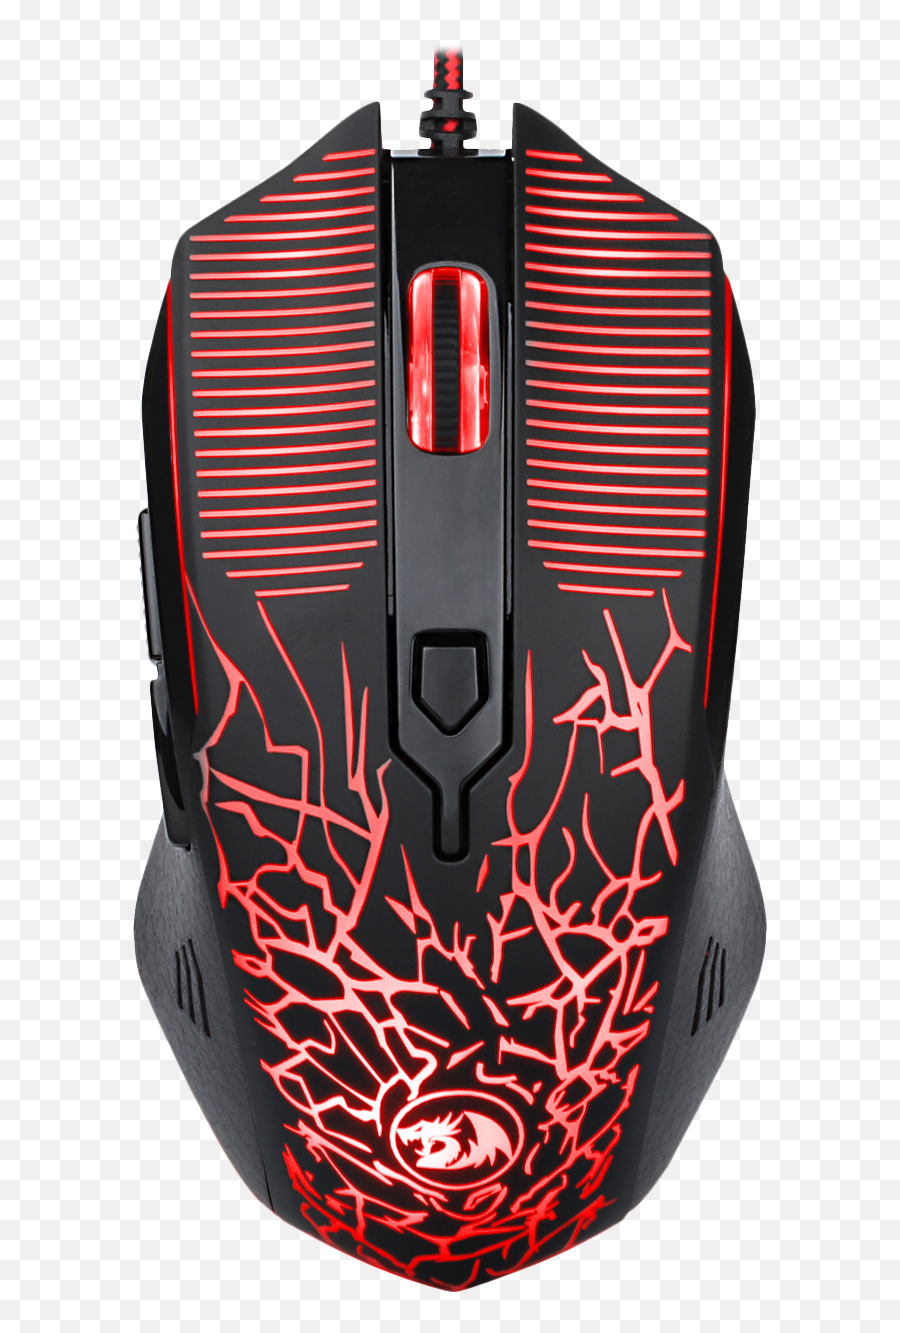 Redragon M608 Wired Gaming Mouse Ergonomic Led Back Light Pc Laptop Computer 4 Colors 2 Side Buttons 3200 Dpi User Programmable Png